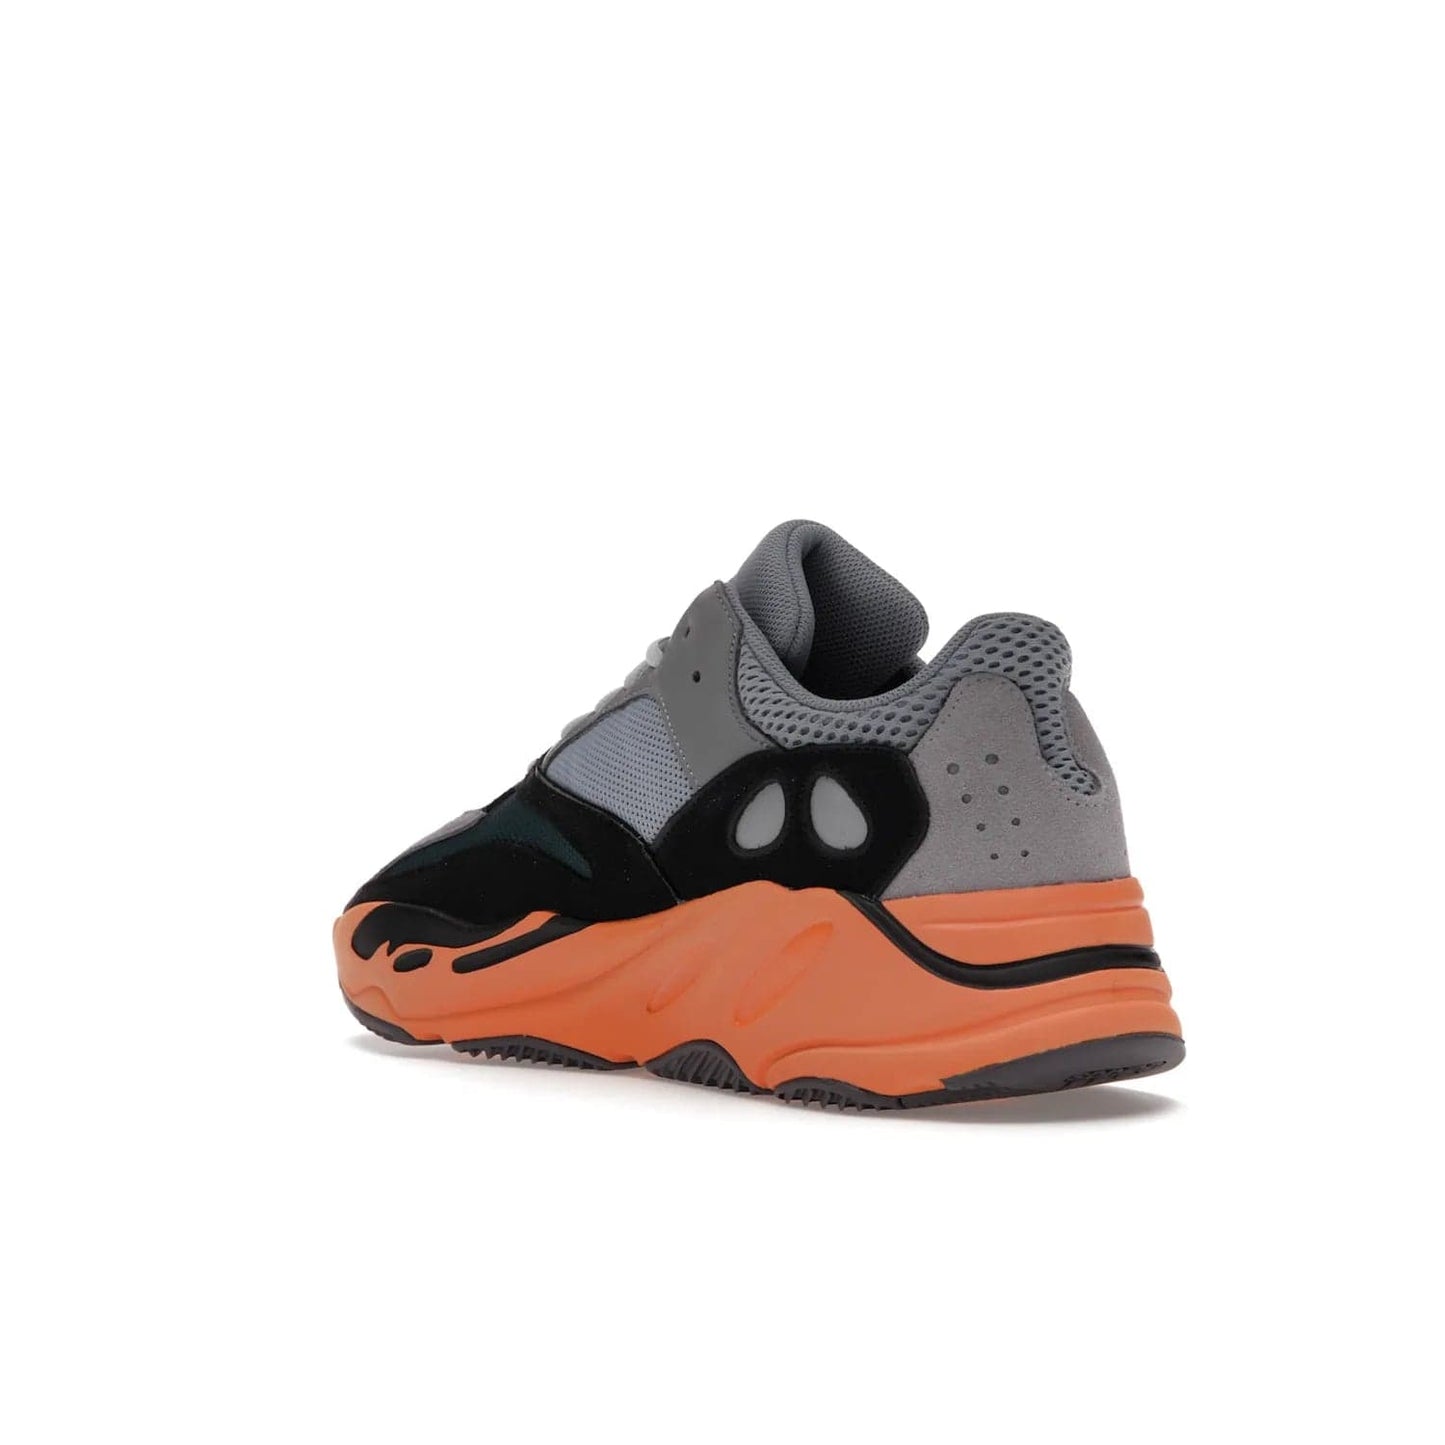 adidas Yeezy Boost 700 Wash Orange - Image 24 - Only at www.BallersClubKickz.com - Introducing the adidas Yeezy Boost 700 Wash Orange. Unique grey leather, suede, mesh upper and teal panels with a chunky Wash Orange Boost midsole. Release October 2021, make a statement today!